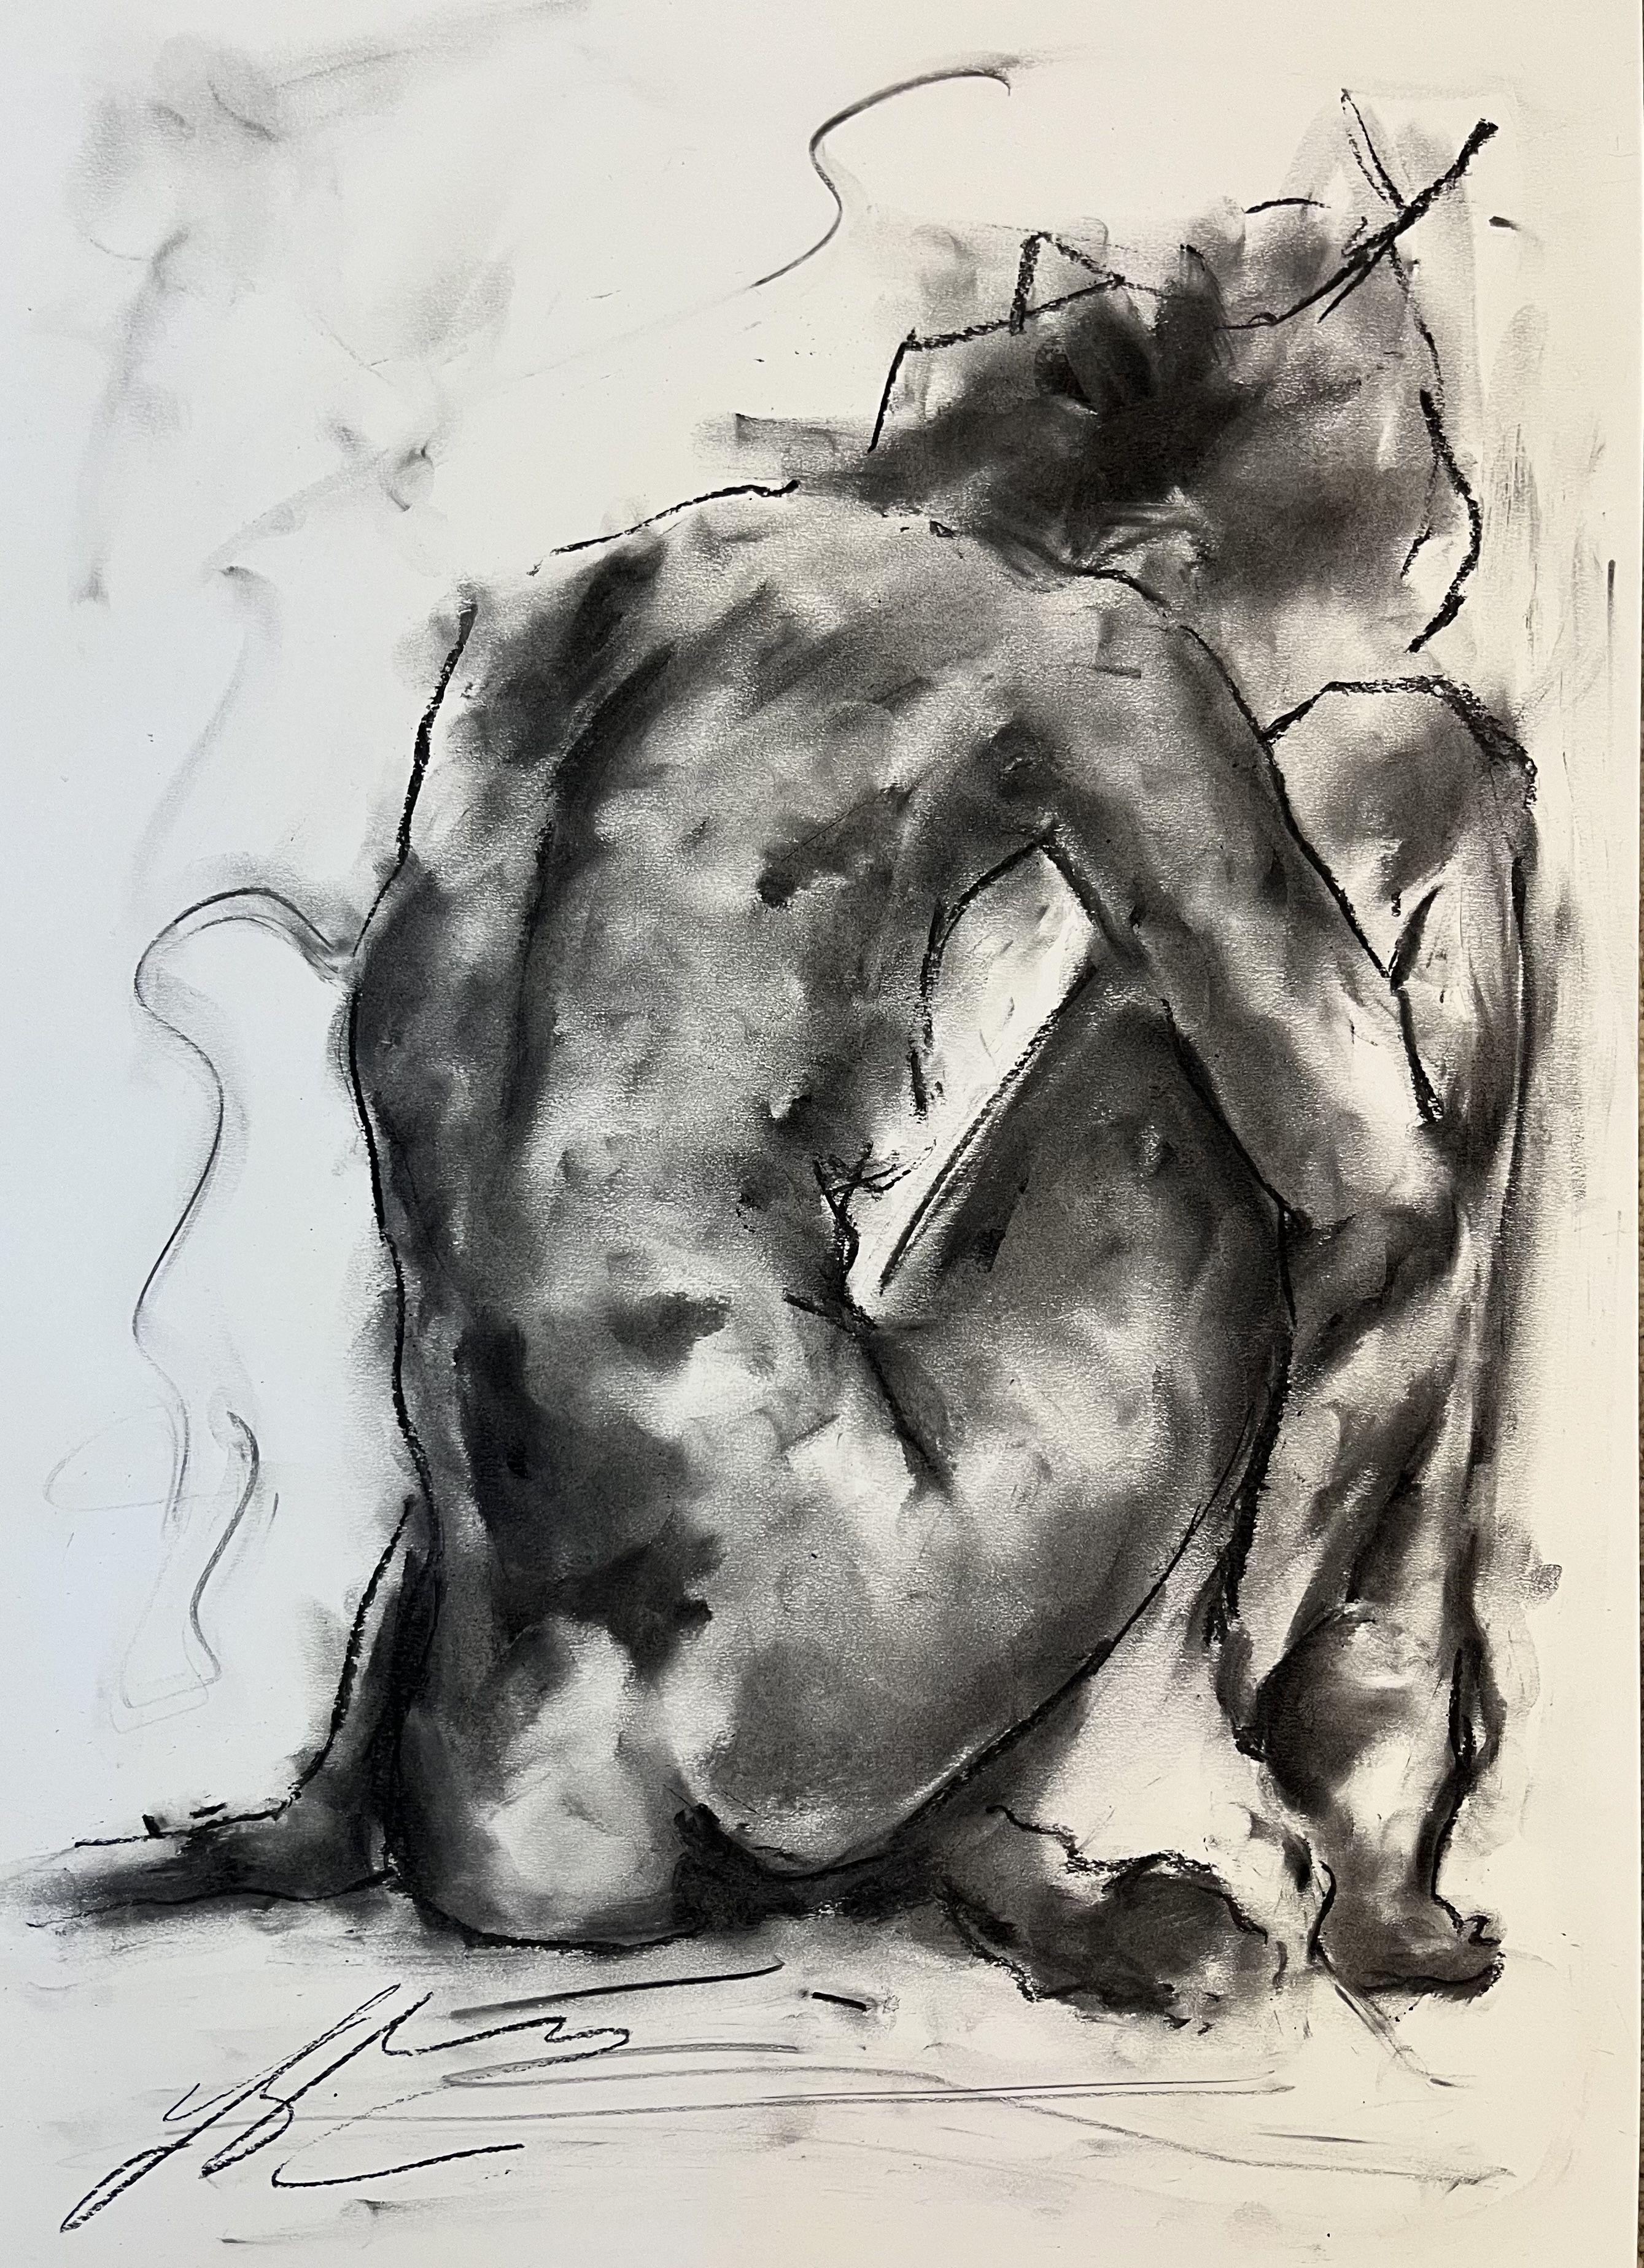 Explore, Drawing, Charcoal on Paper - Art by James Shipton